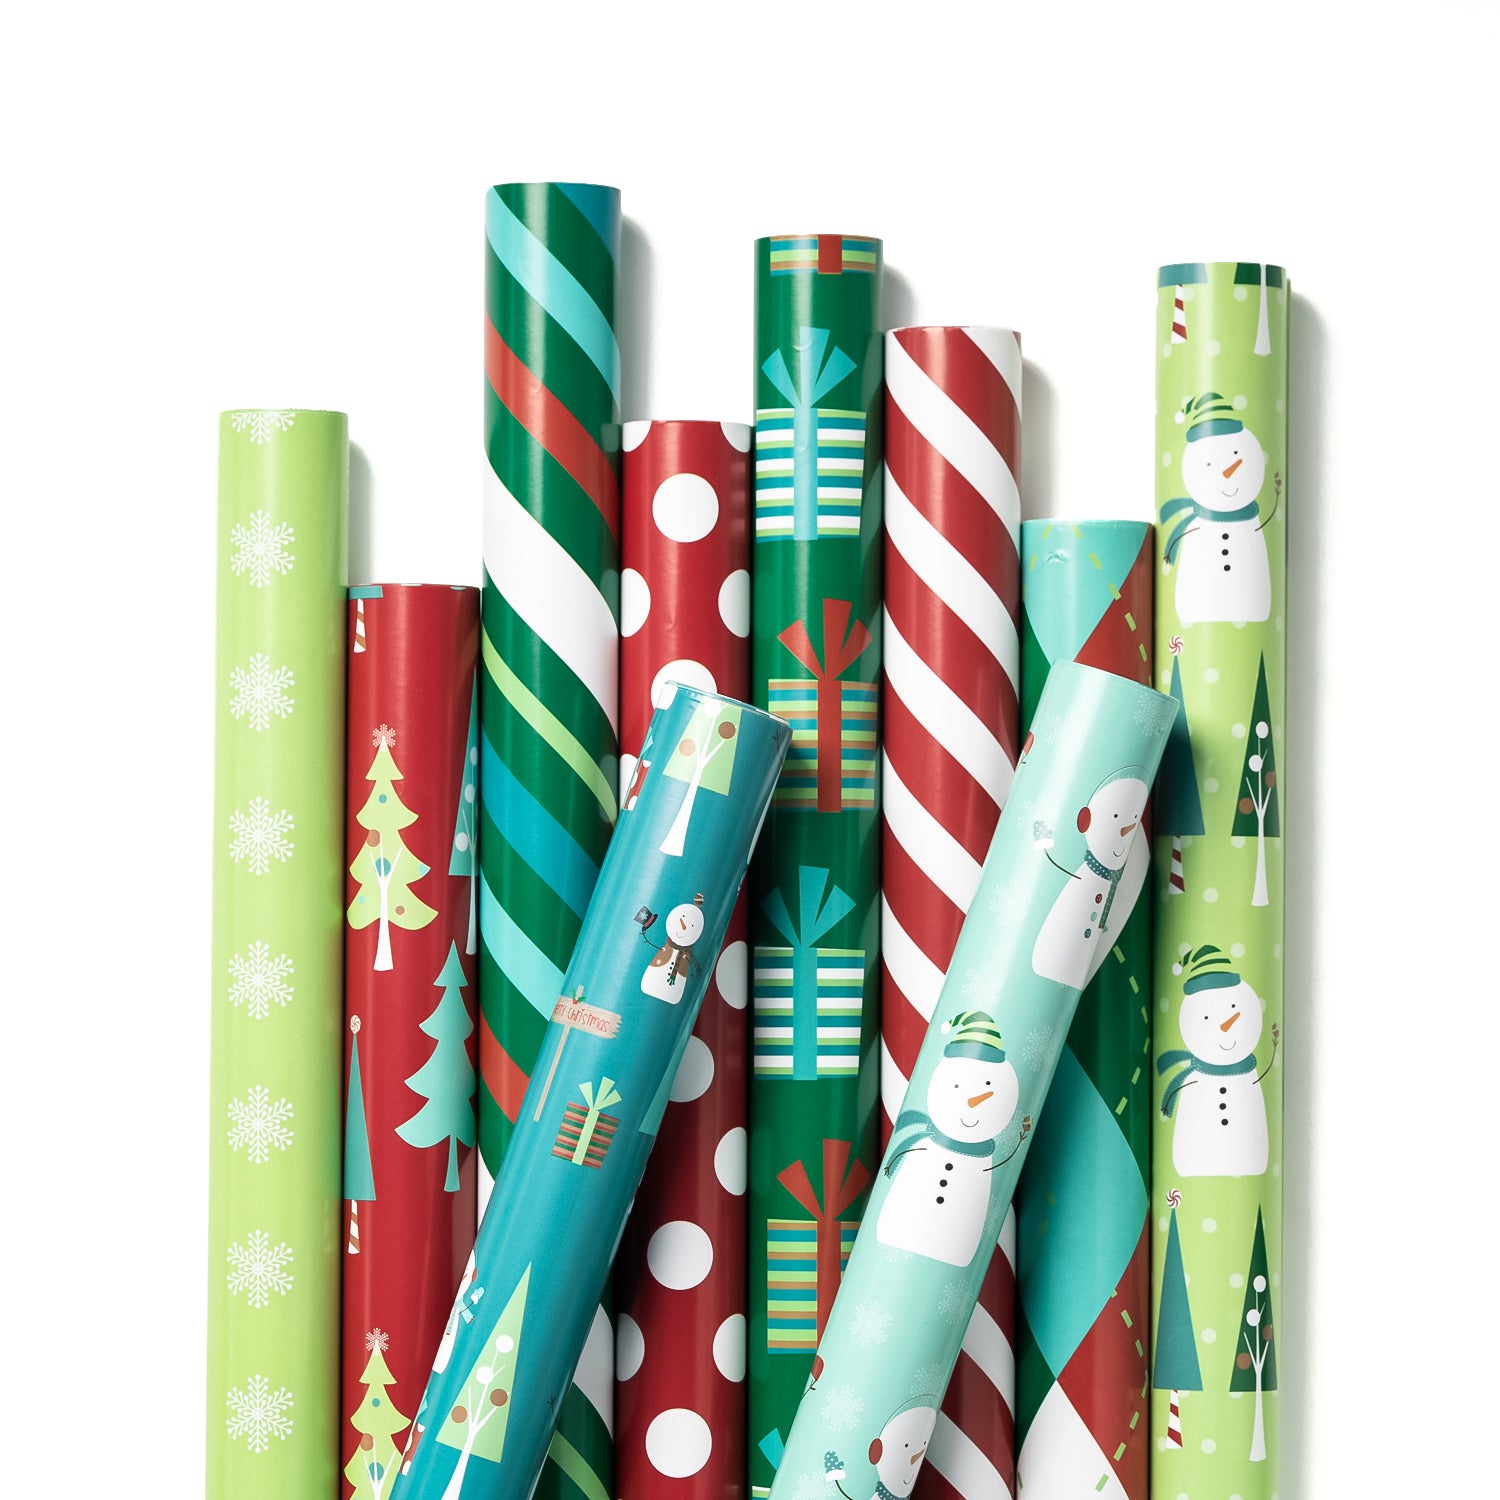  Hallmark Flat Christmas Wrapping Paper Sheets with